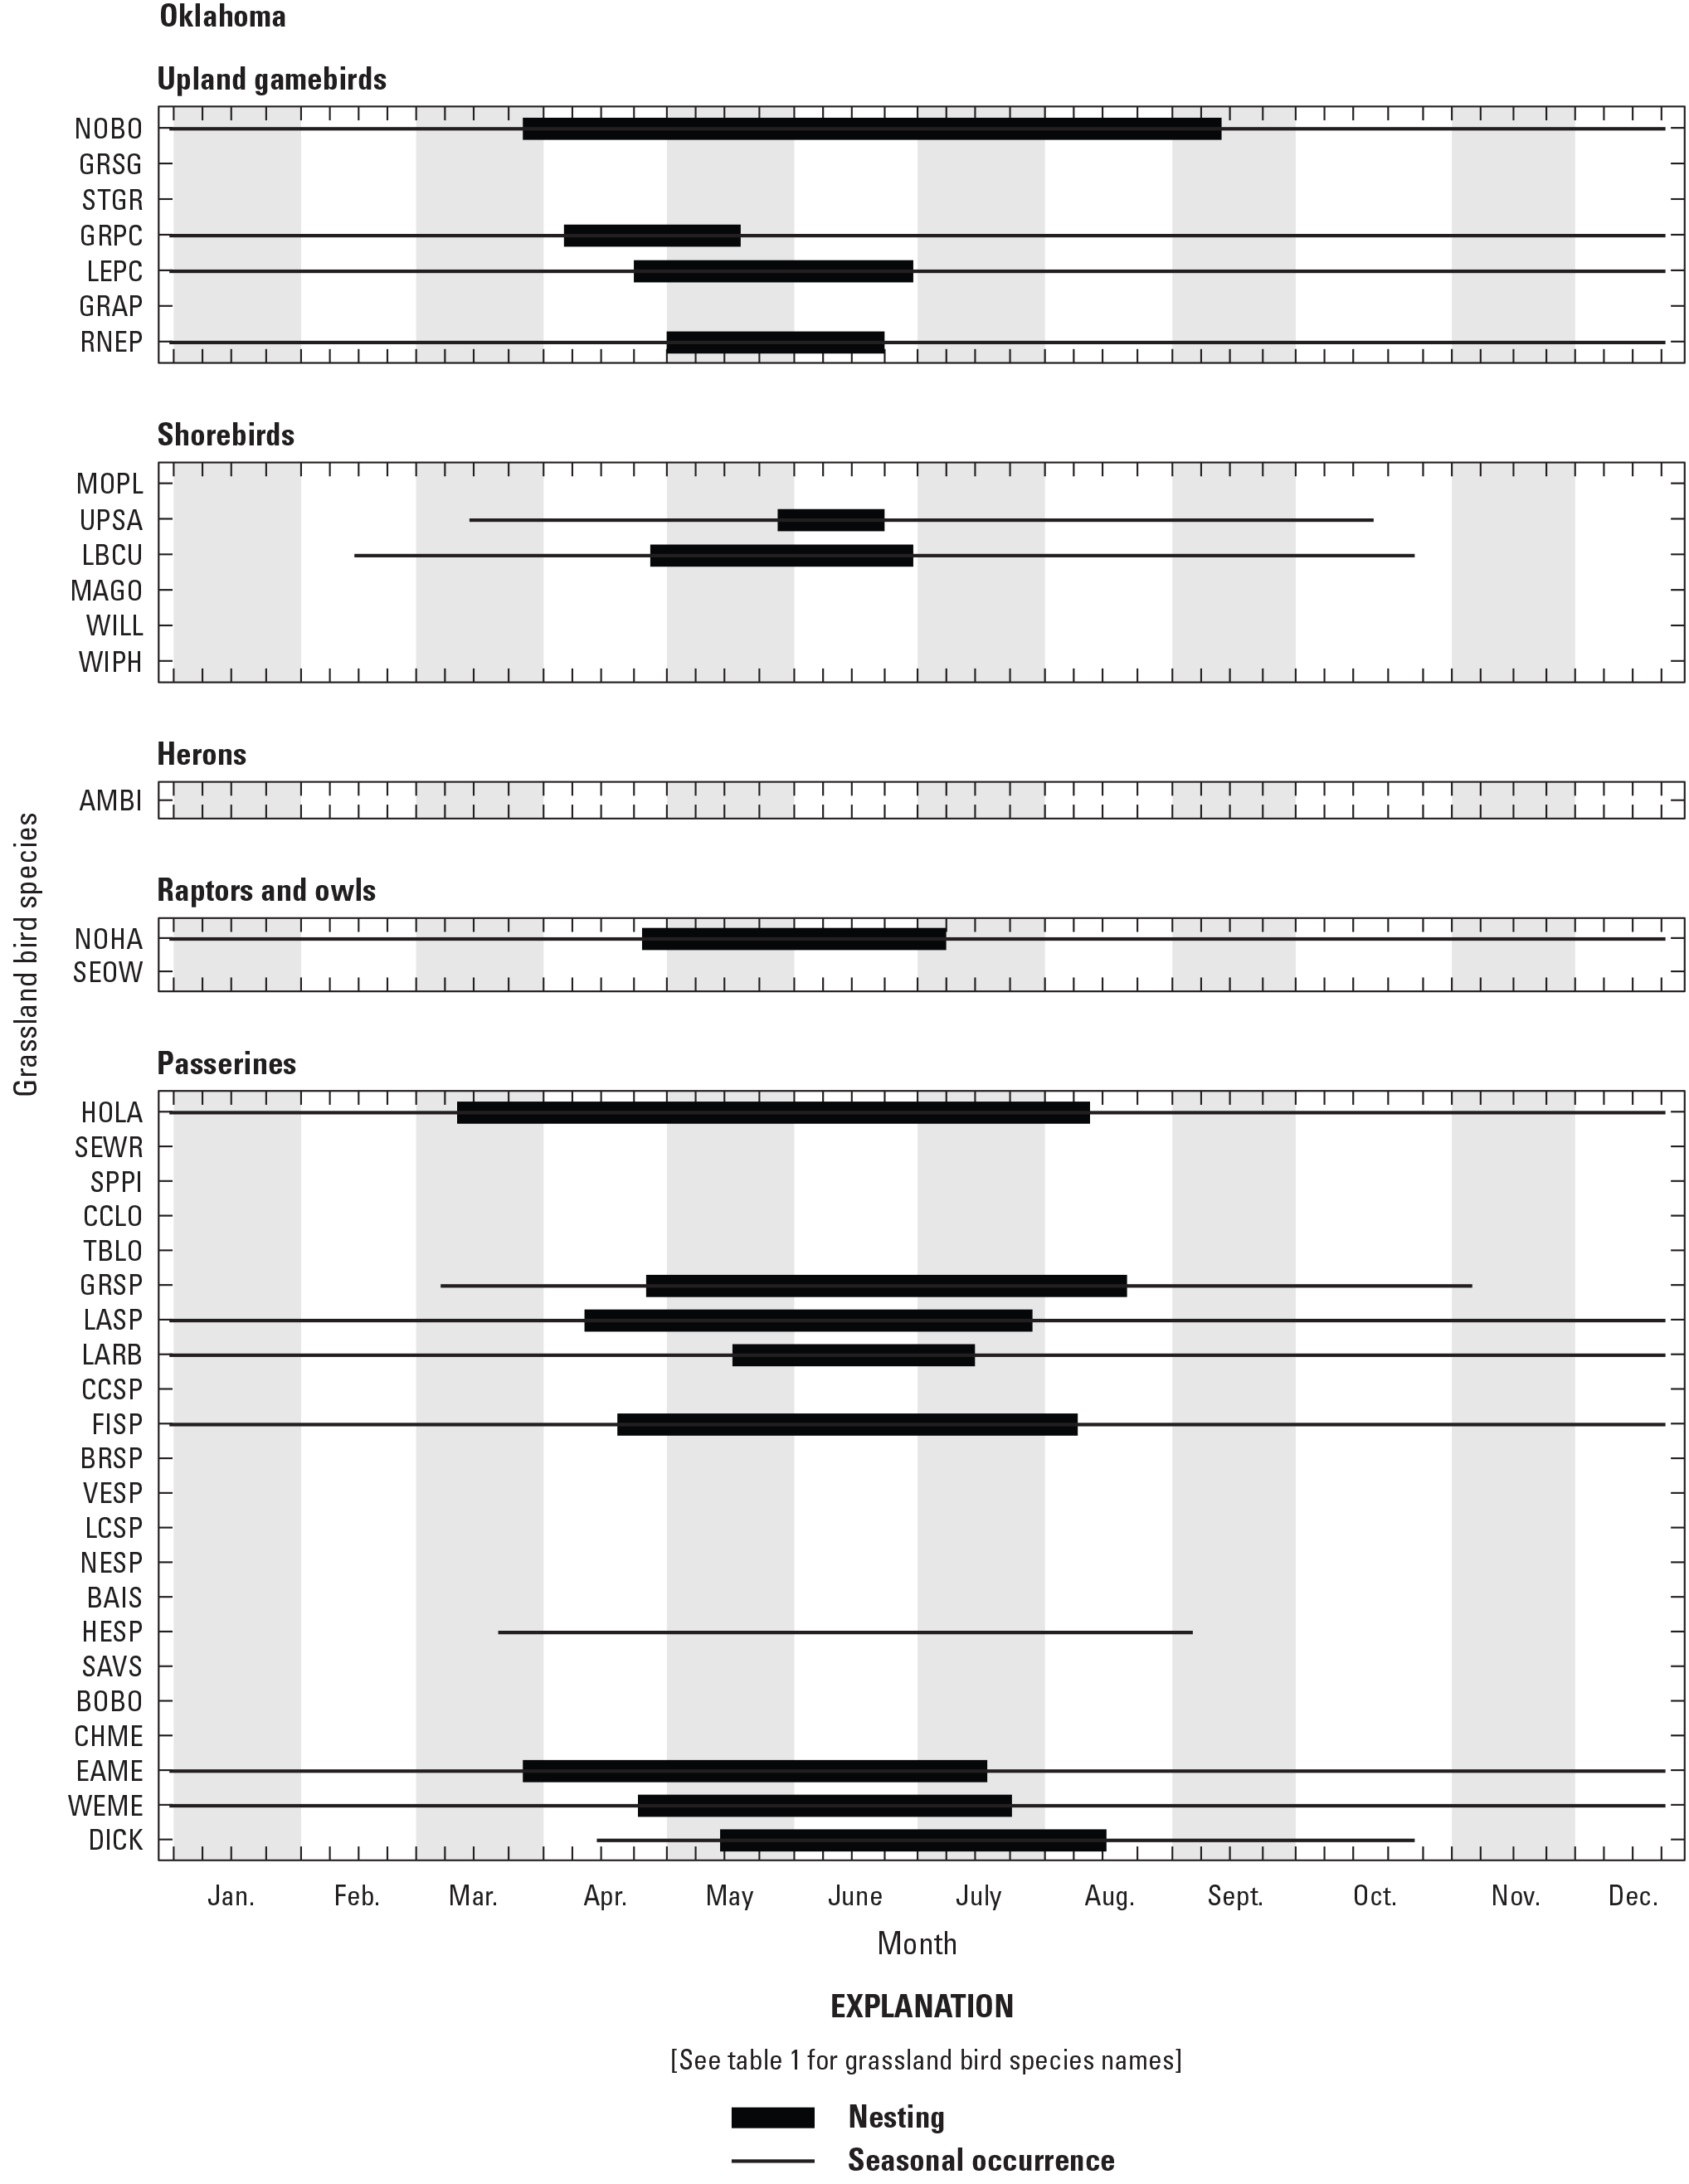 Figure showing seasonal occurrence and nesting phenology for 38 grassland bird species
               in Oklahoma, United States.